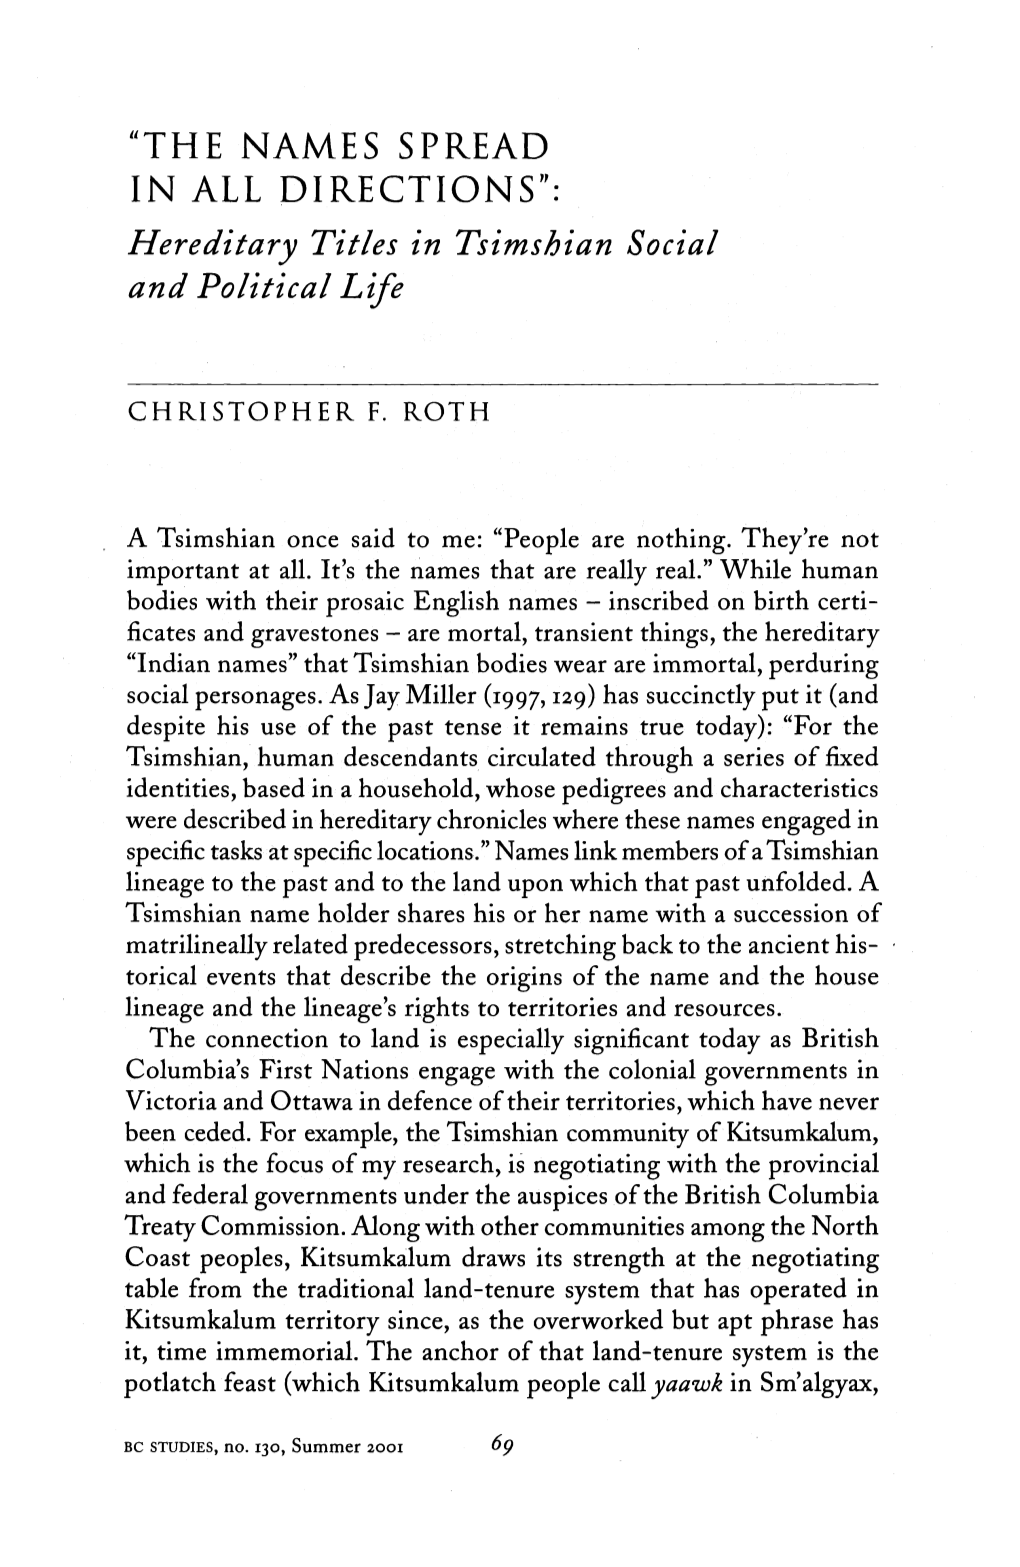 "THE NAMES SPREAD in ALL DIRECTIONS": Hereditary Titles in Tsimshian Social and Political Life